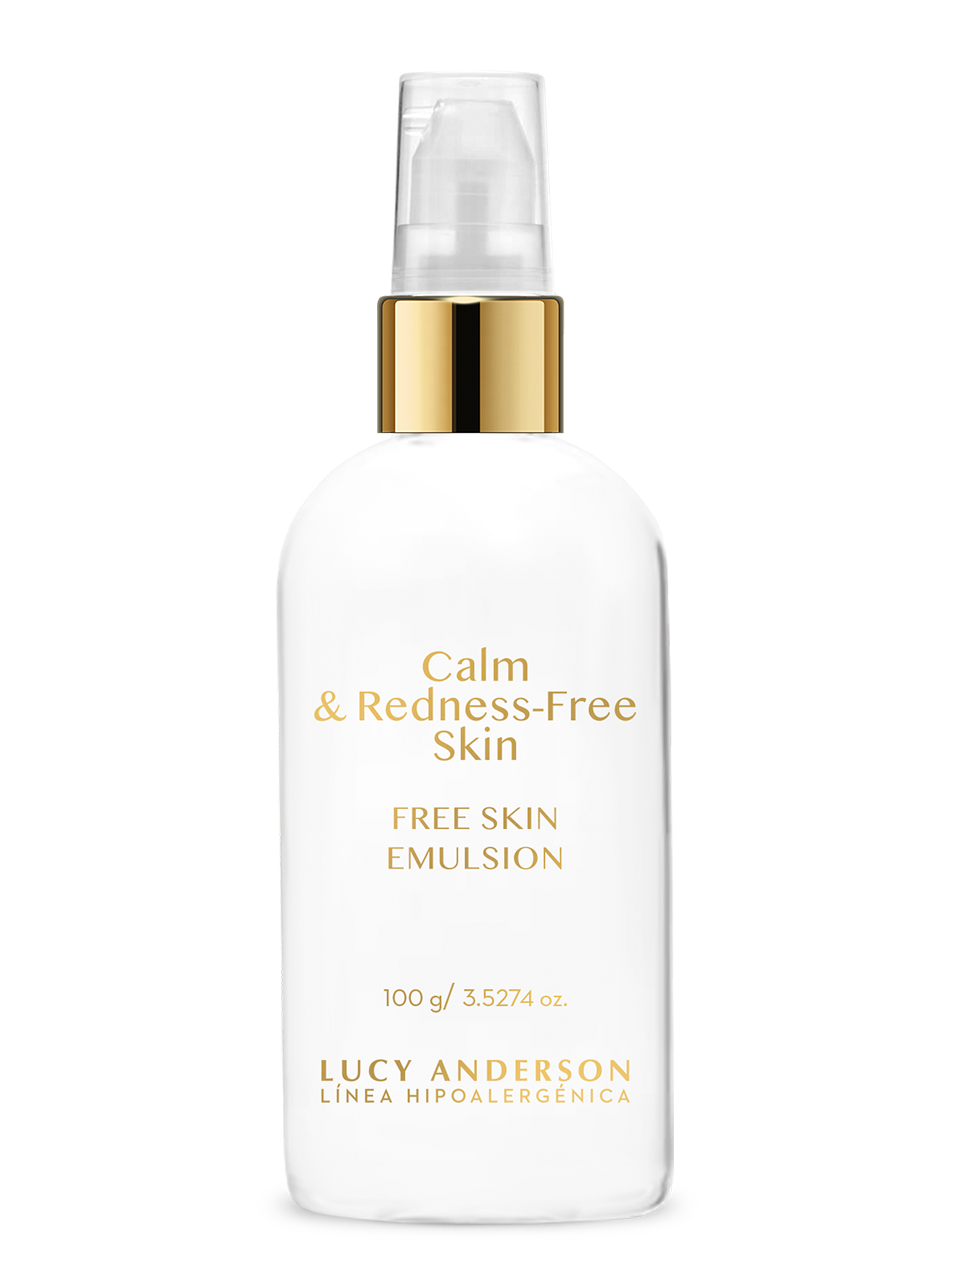 LUCY ANDERSON EMULSION CALM REDNESS FREE SKIN X 100 G.